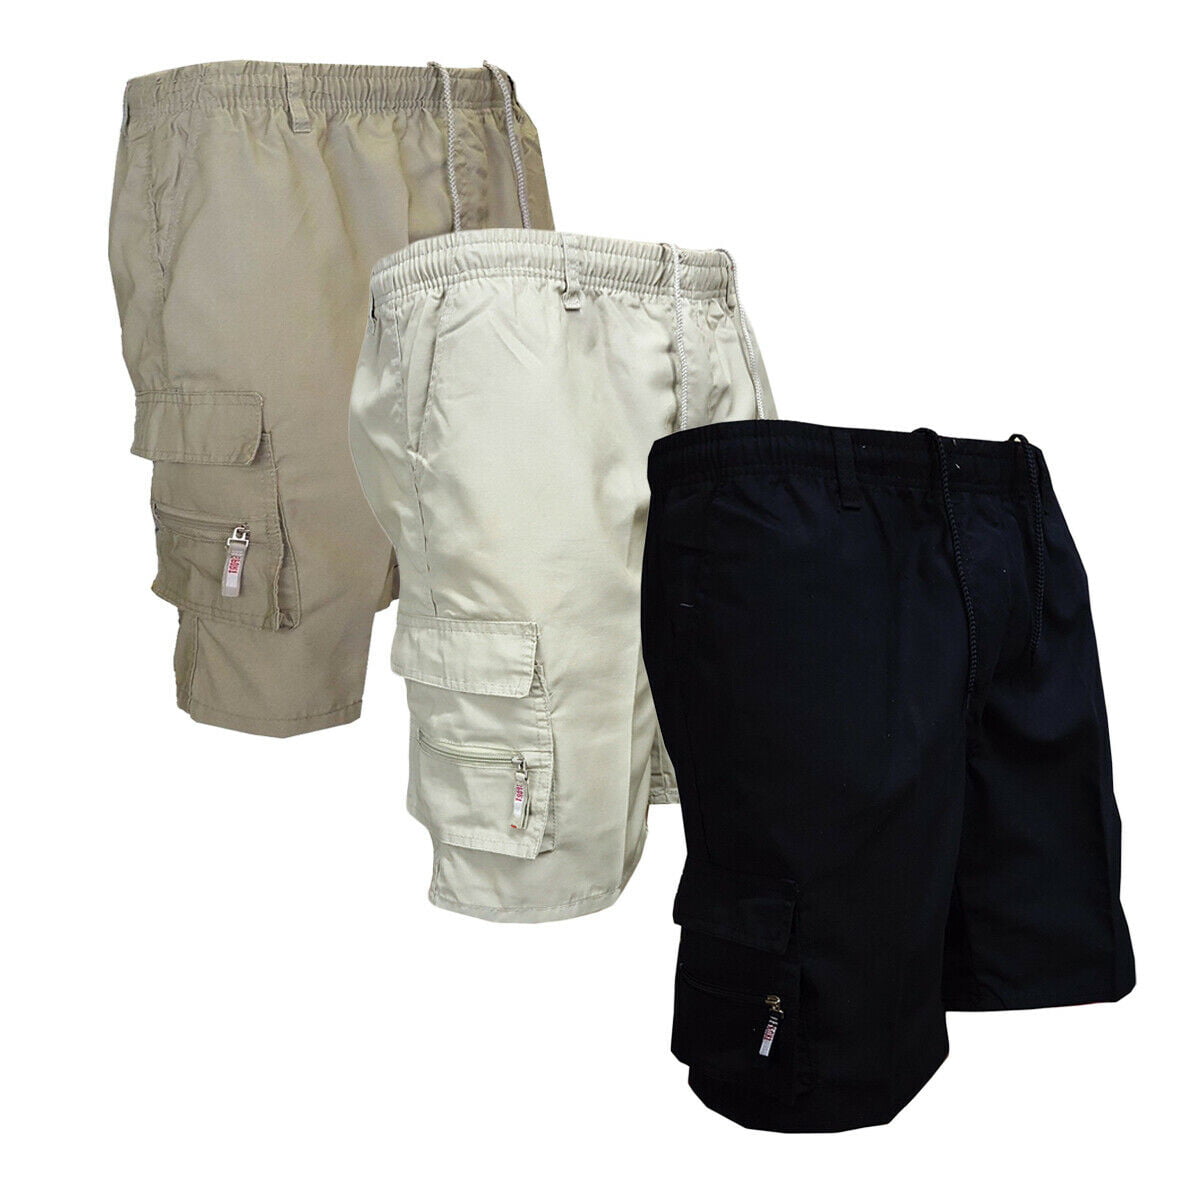 OUBAO Mens Cargo Shorts Pants Casual Pure Color Outdoors Pocket Beach Work Trouser Pant